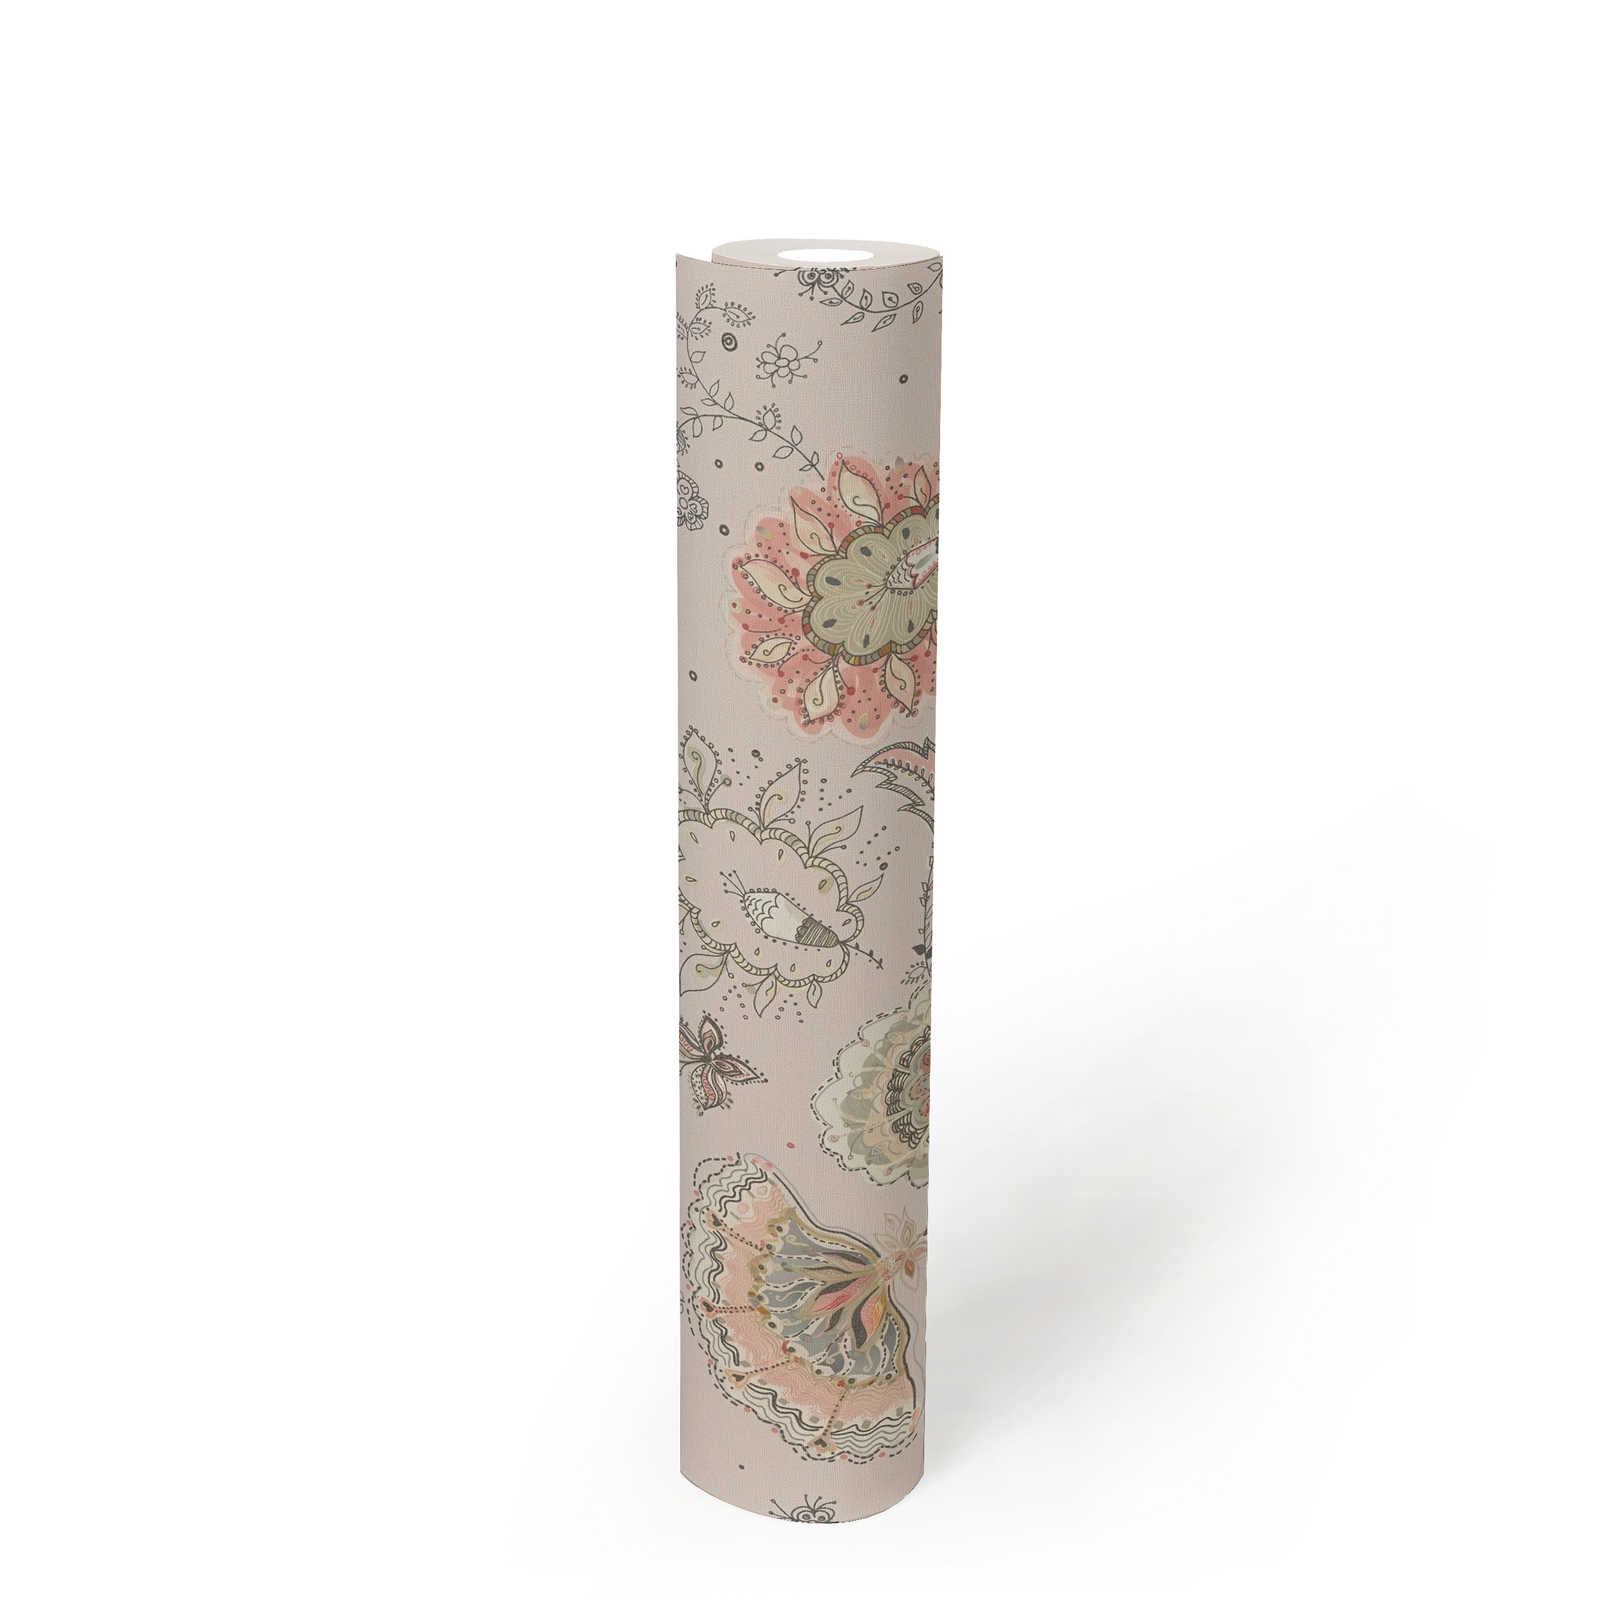             Floral wallpaper with abstract floral pattern & fine structure - grey, beige, red
        